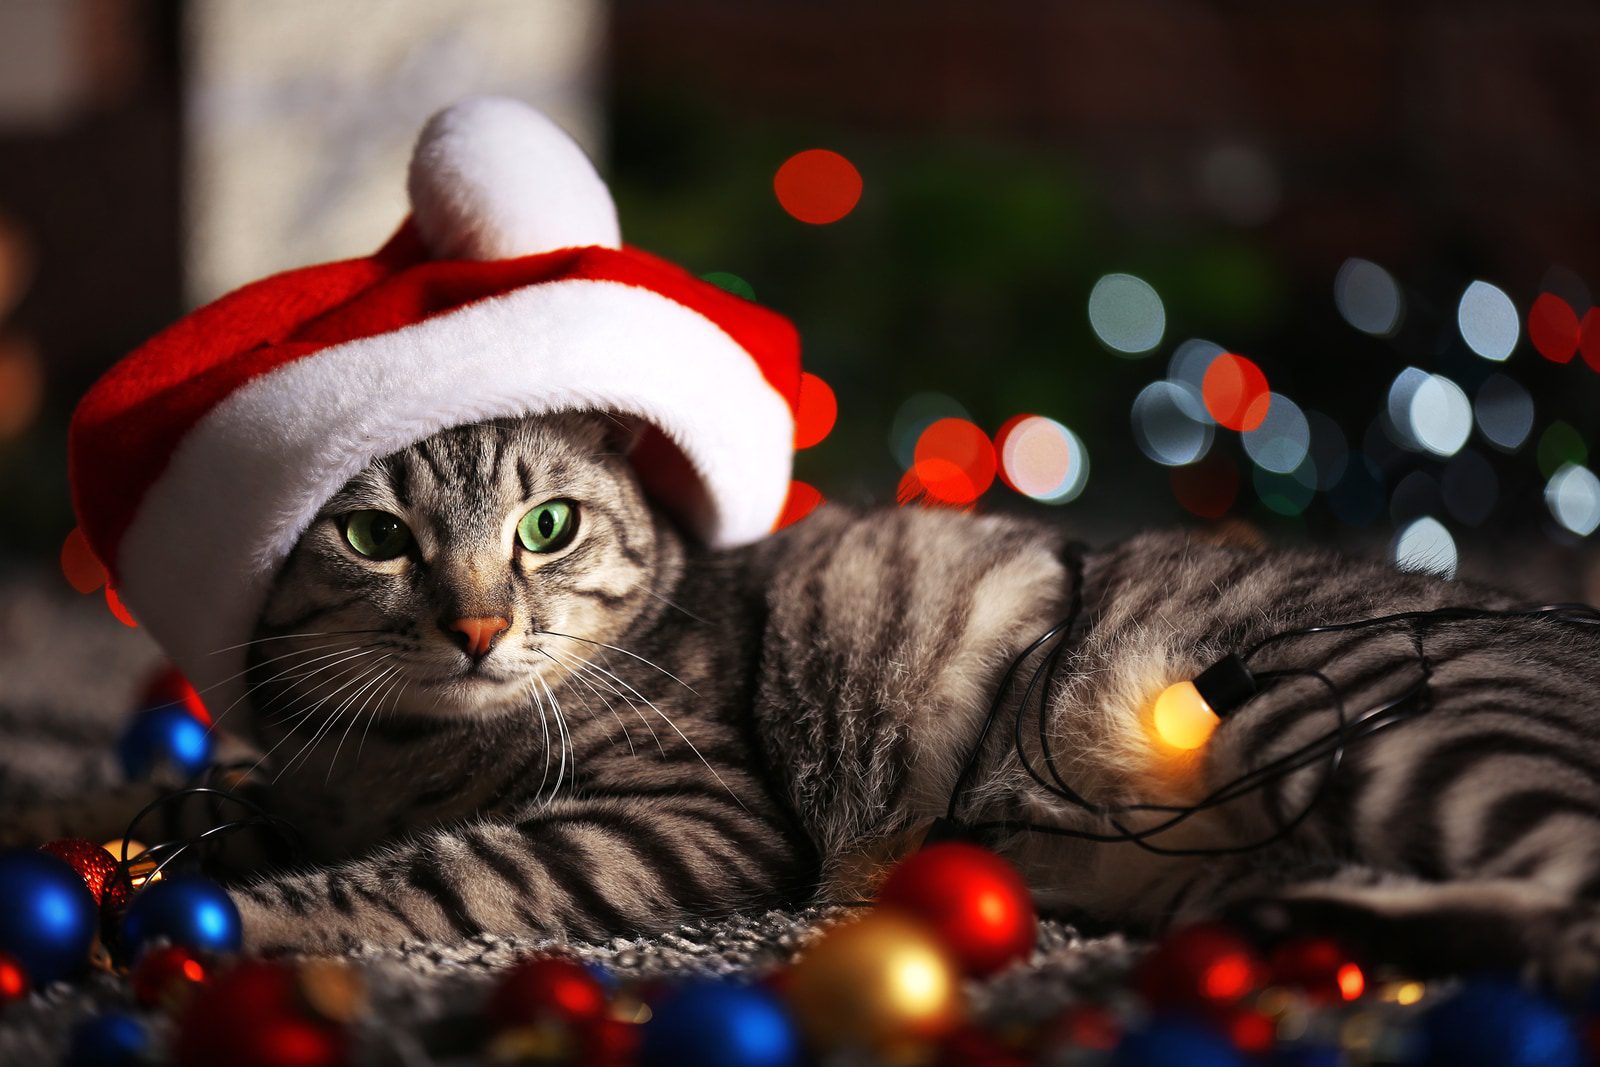 How to celebrate holidays if the cat is afraid of noise